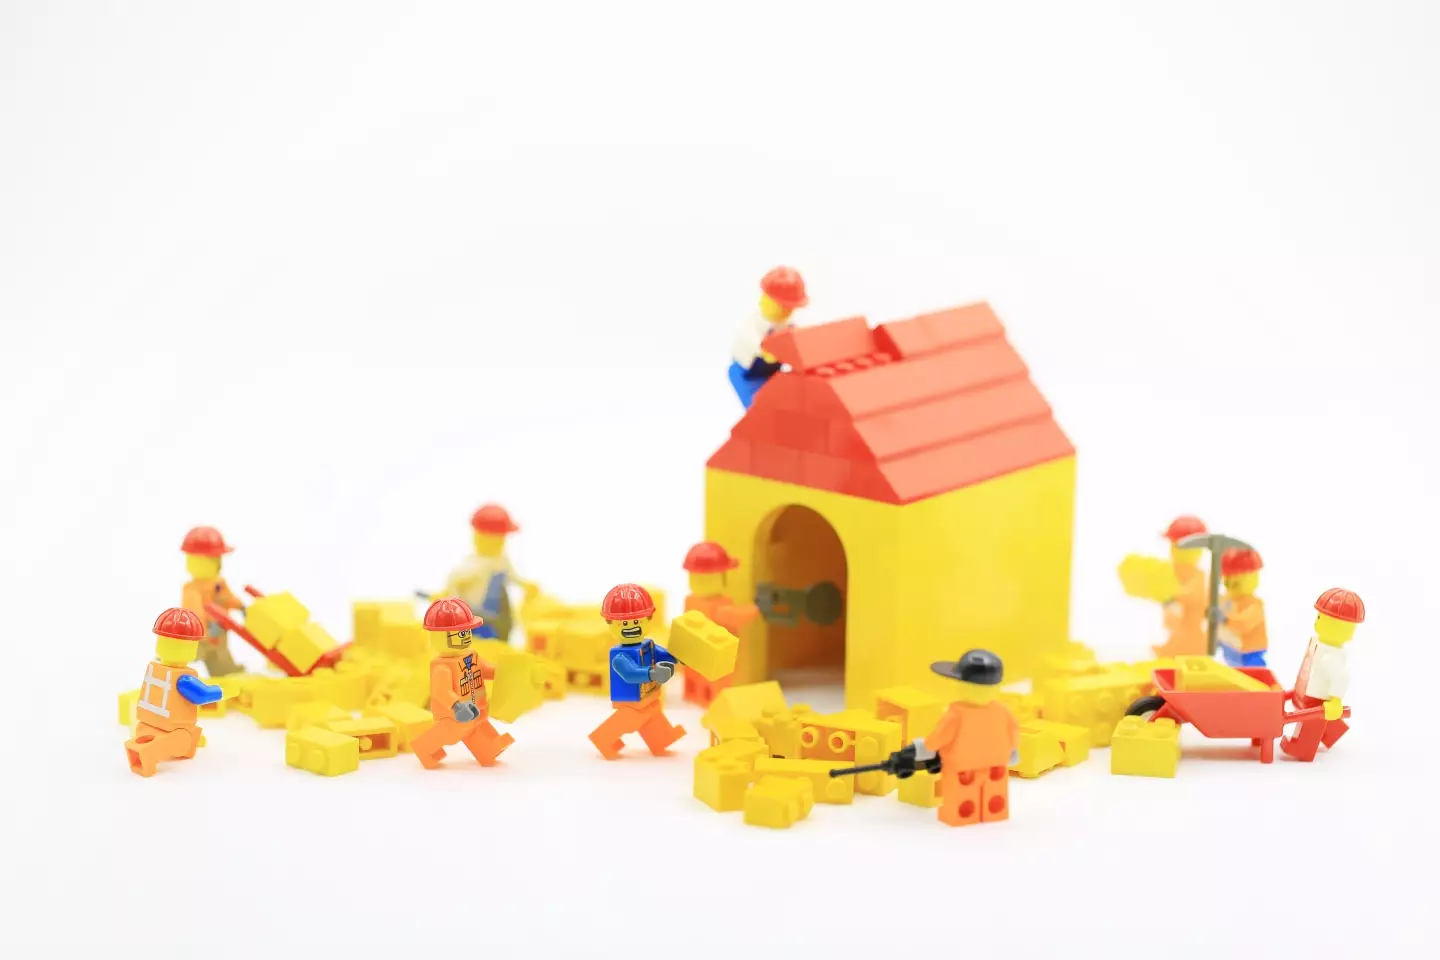 When you say that Lego people are building houses out their own flesh, then yeah, it sounds pretty creepy.